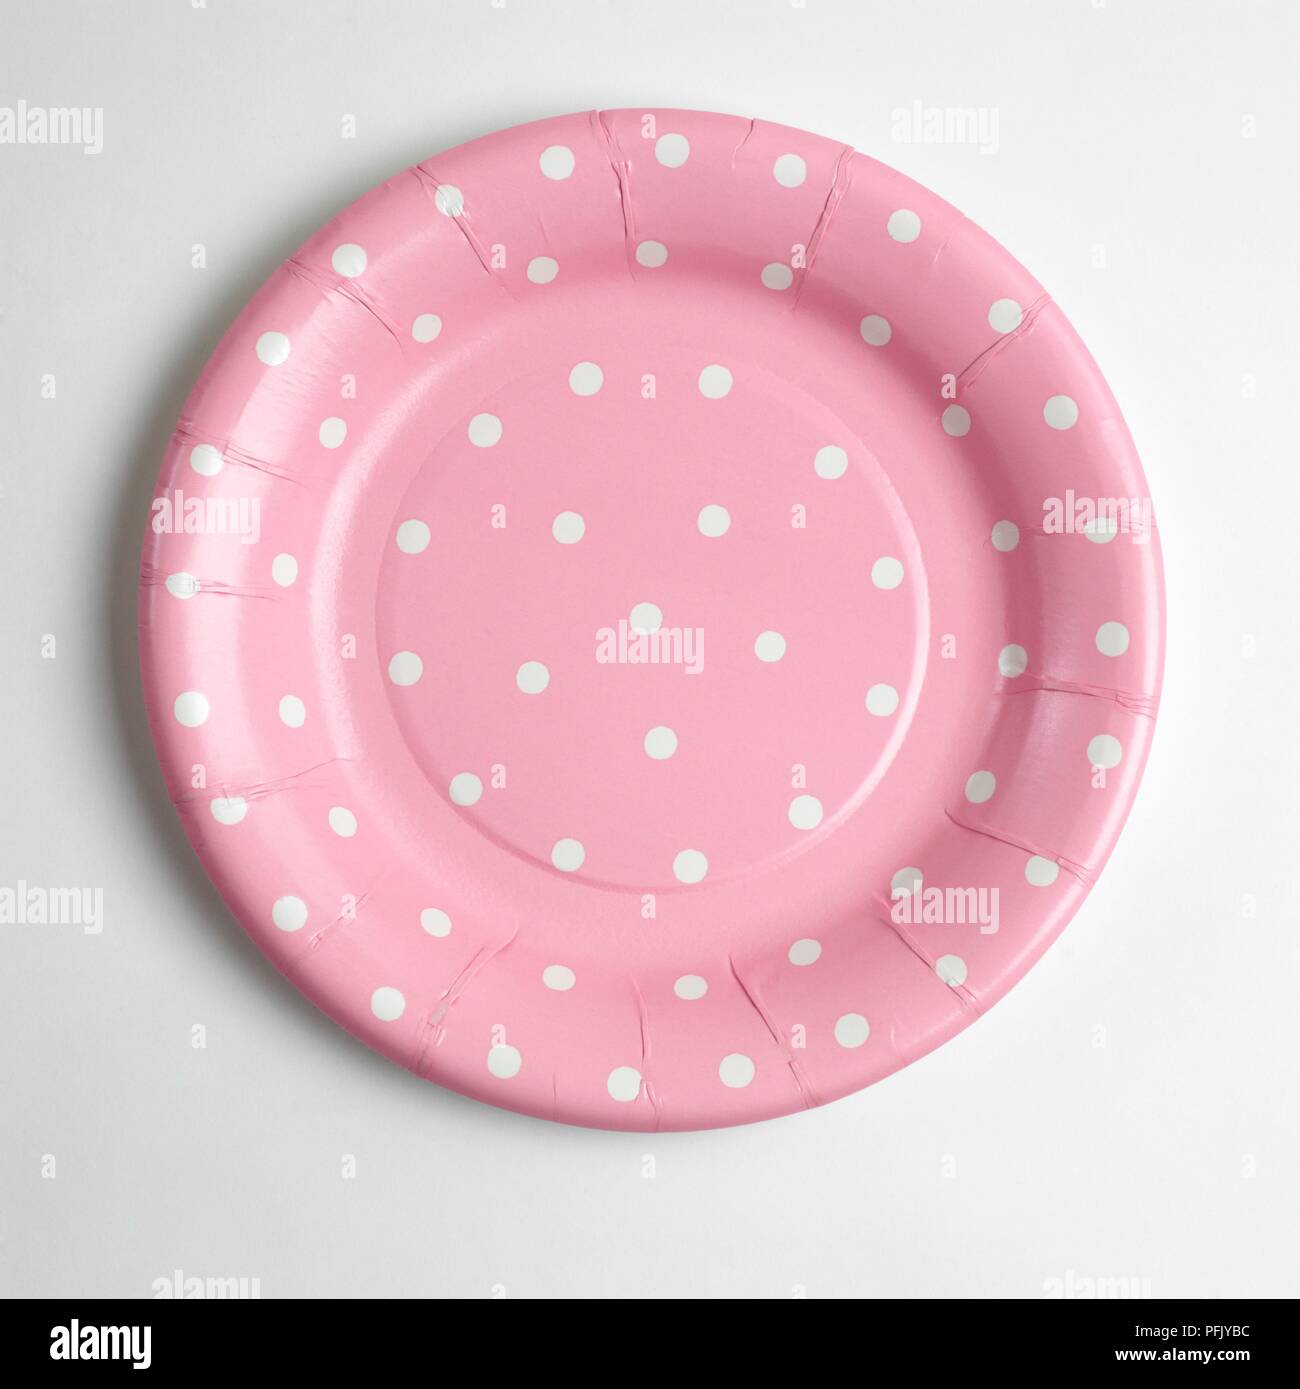 Pink paper plate with white polka dots Stock Photo